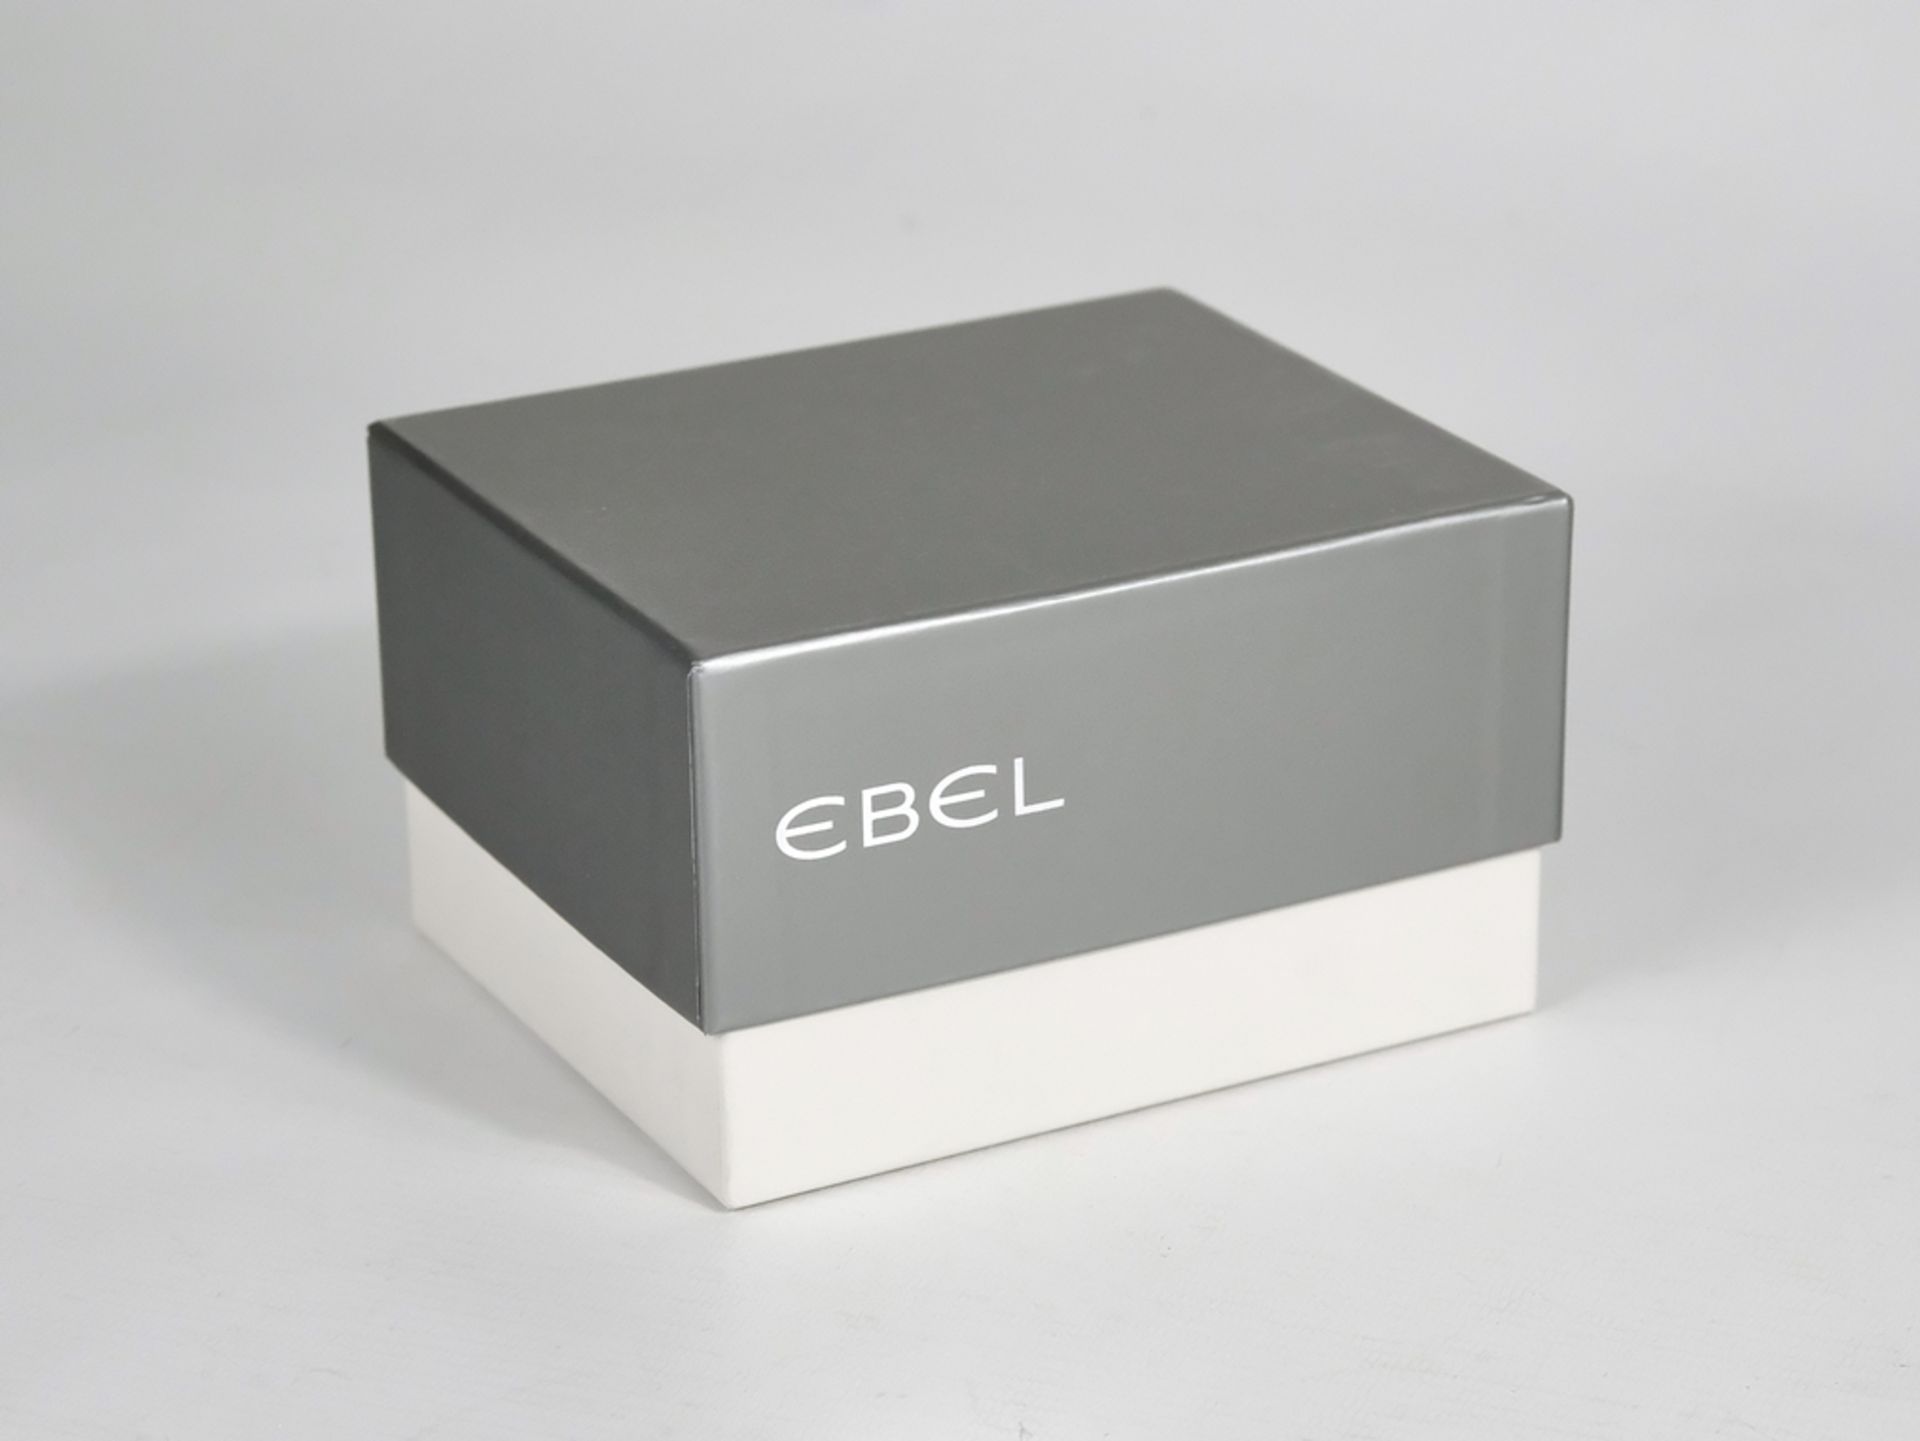 EBEL WATCH "Discovery", black dial with white Arabic numerals, white geometric hands, D 4cm, quartz - Image 6 of 7